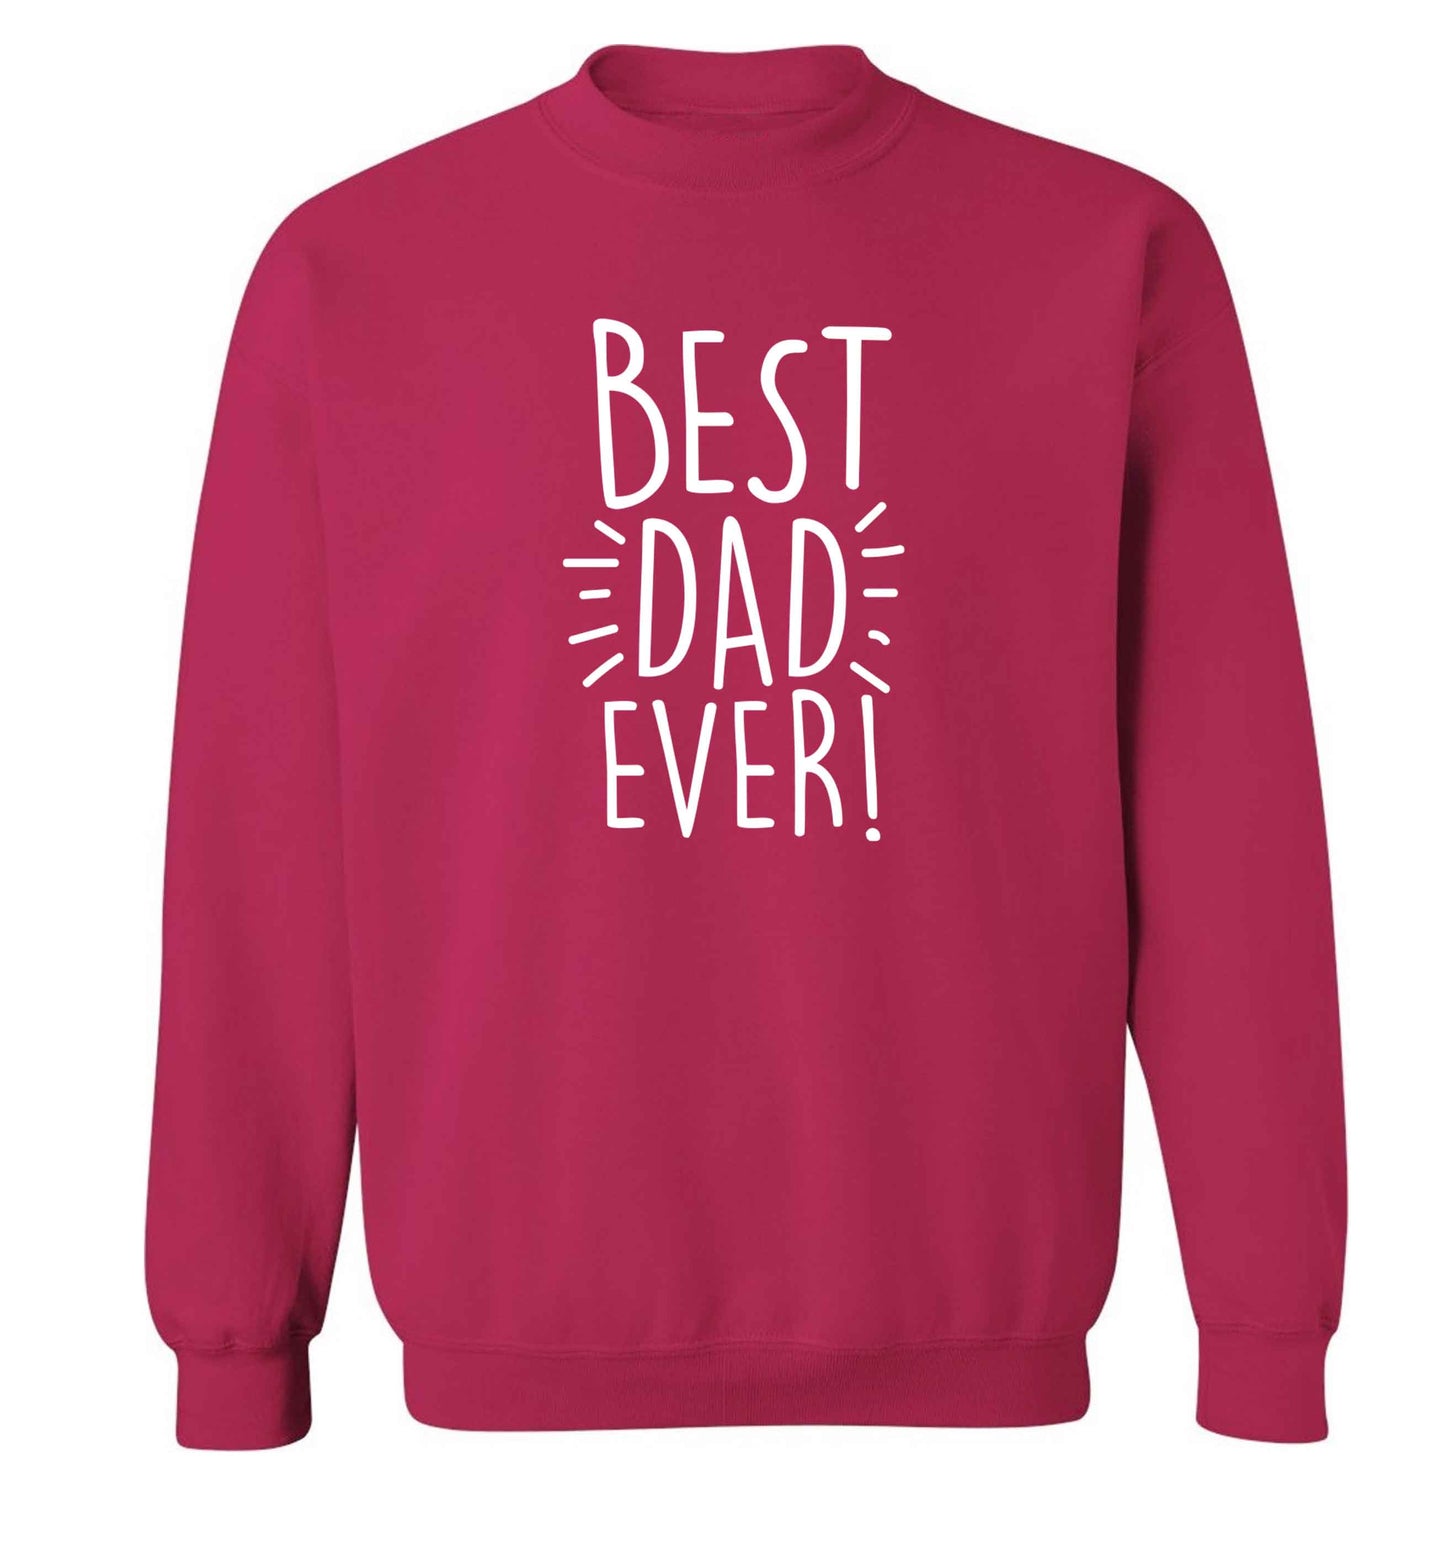 Best dad ever! adult's unisex pink sweater 2XL